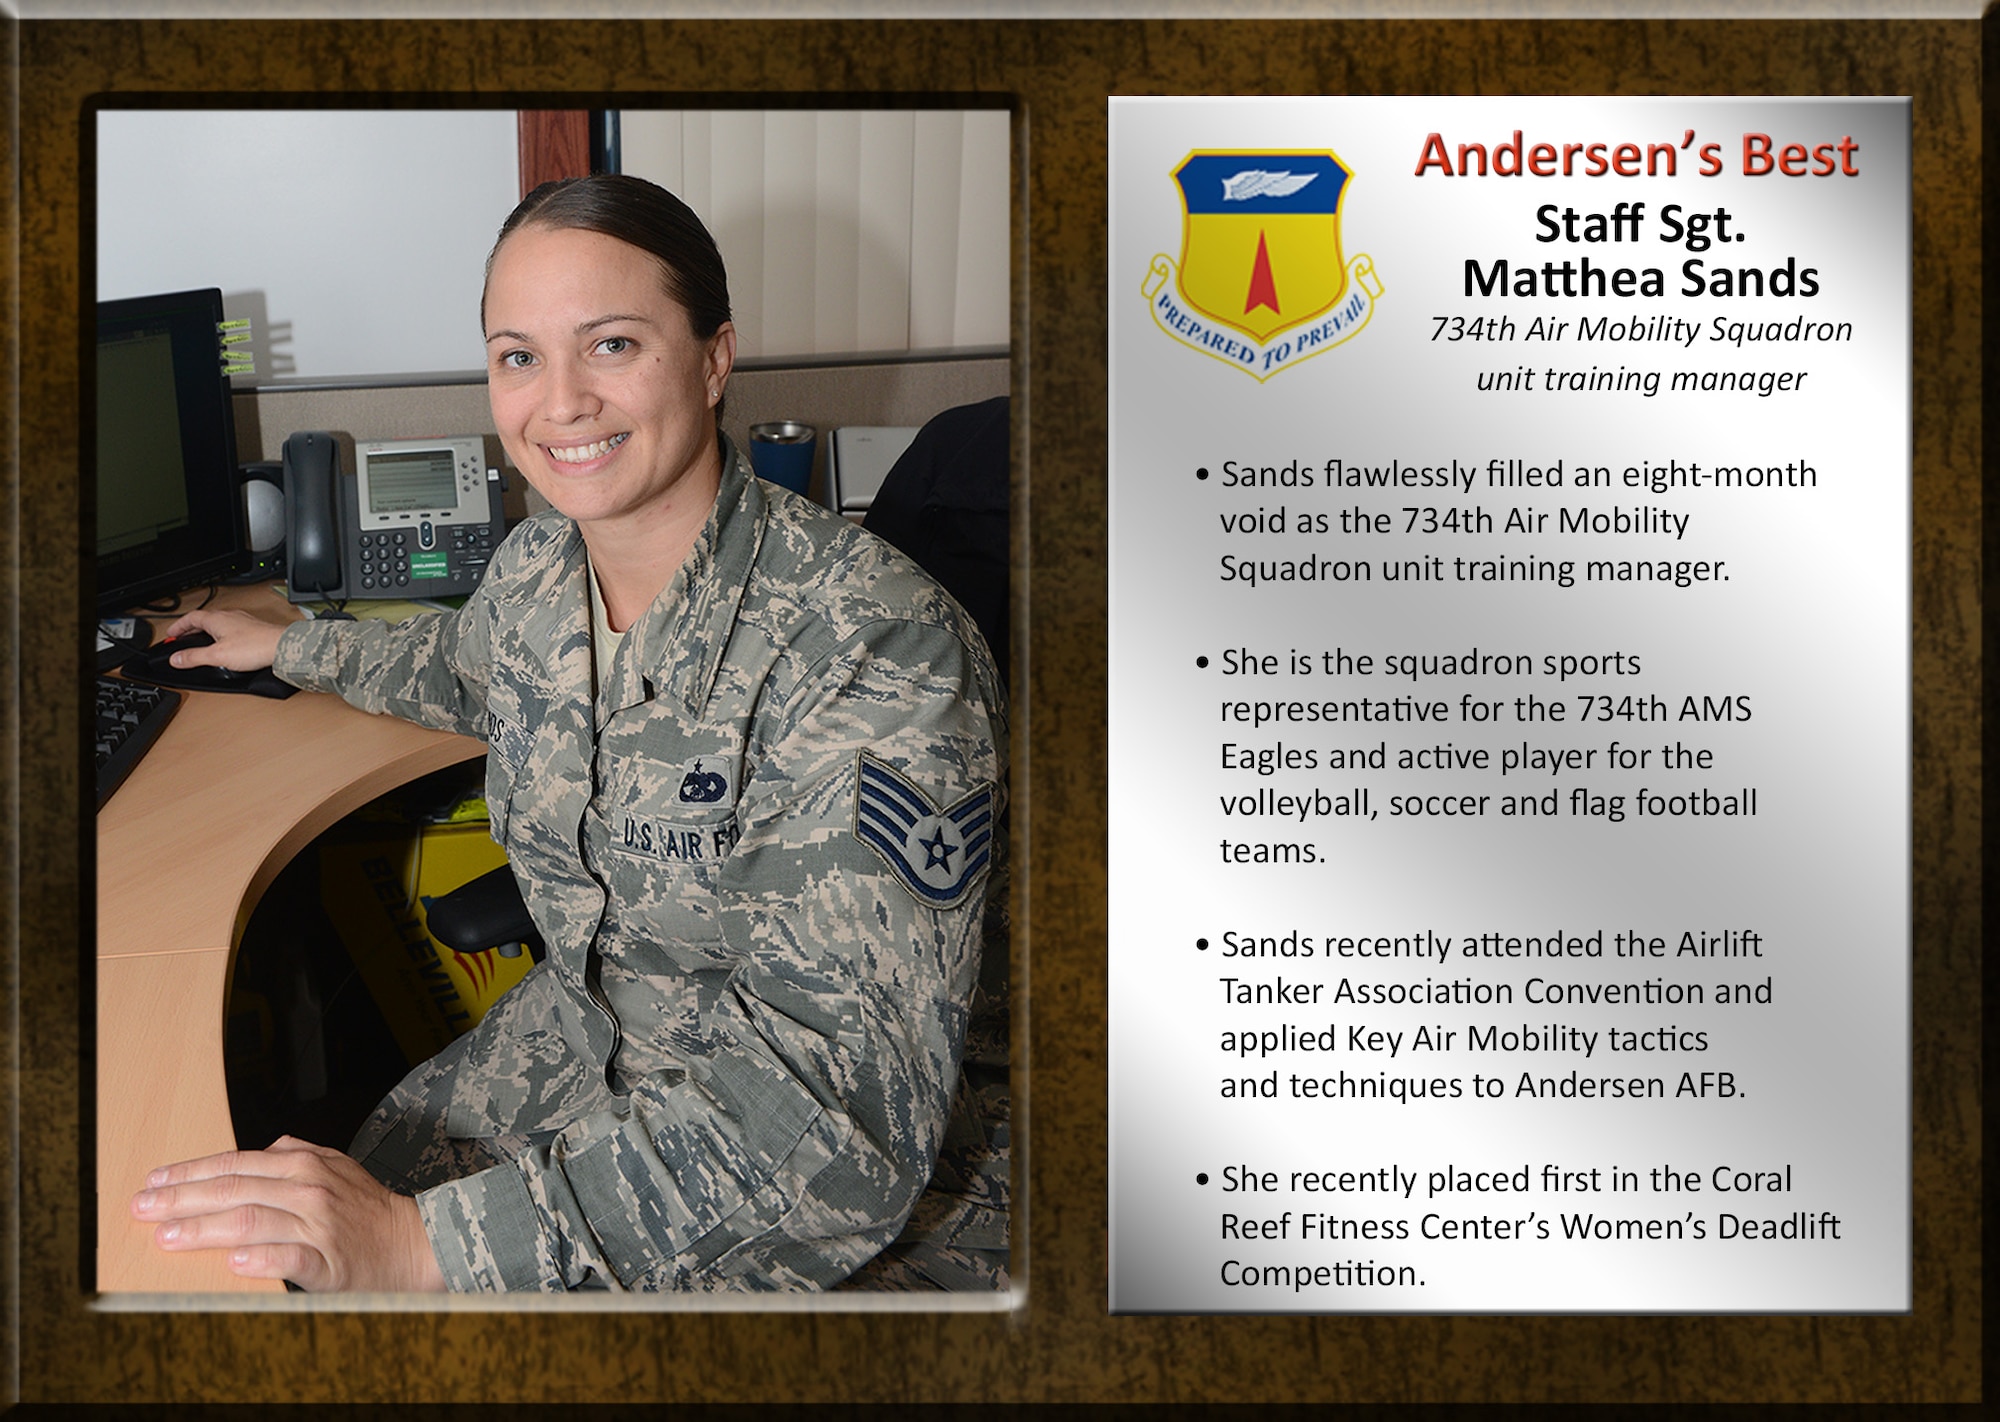 Team Andersen's Best recognizes Airmen and civilian professionals for outstanding contributions to mission and team success. As spotlight performers, individuals are chosen by base leaders for demonstrating the Air Force's core values of integrity first, service before self, and excellence in all we do. 